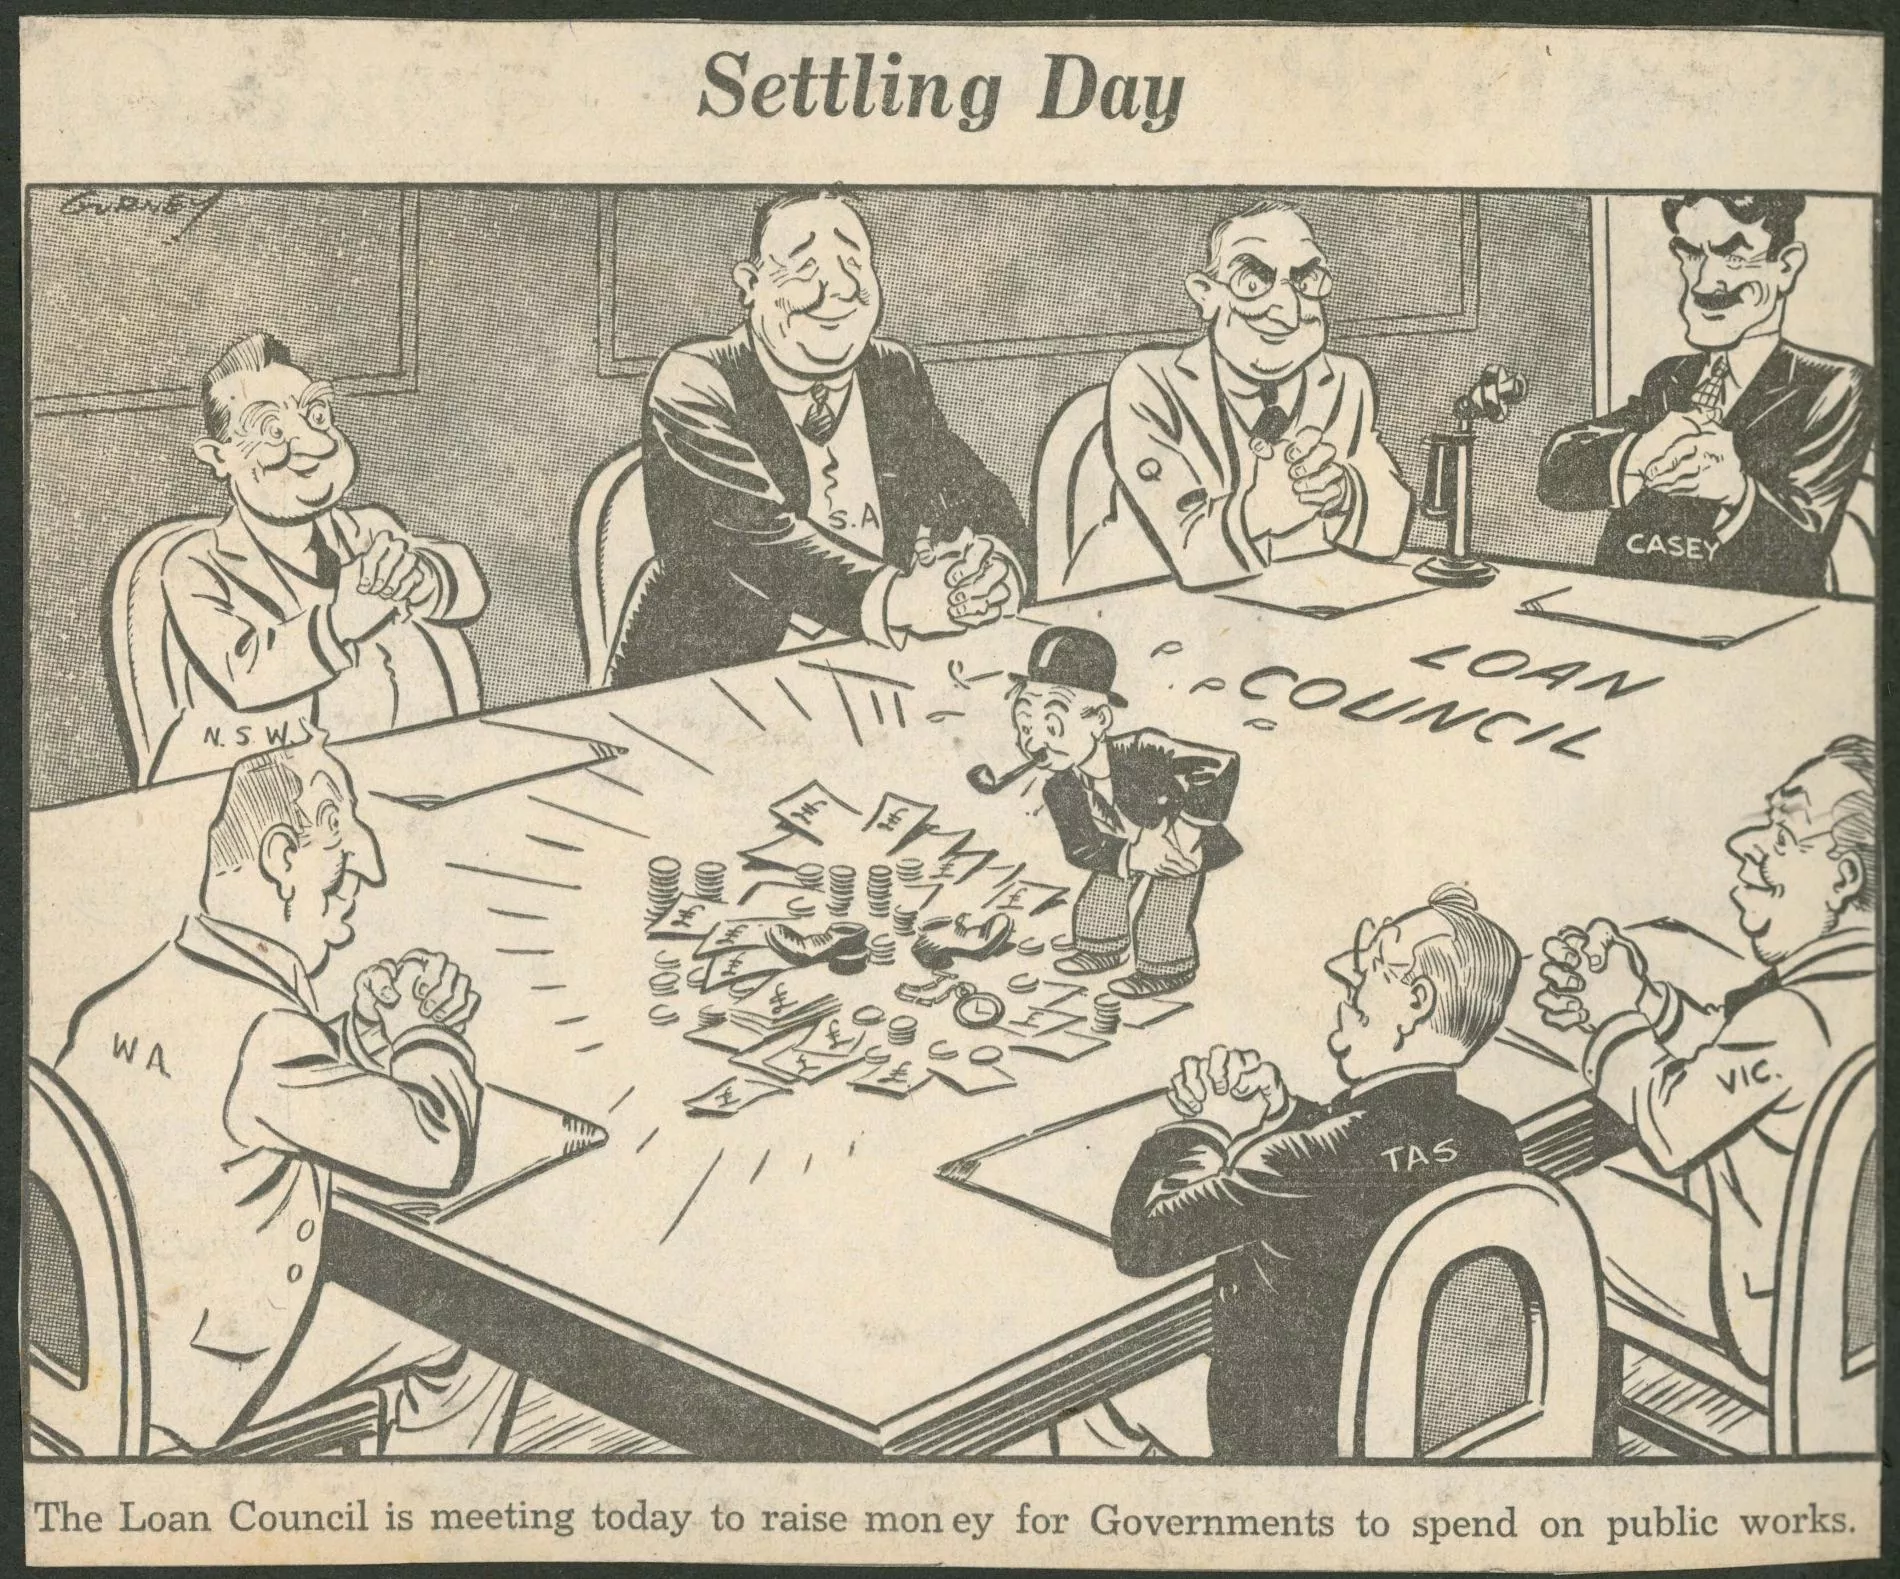 A newspaper cartoon in black and white of a group of men sitting around a table with the words Loan Council written on it and a Monopoly man character in the middle.